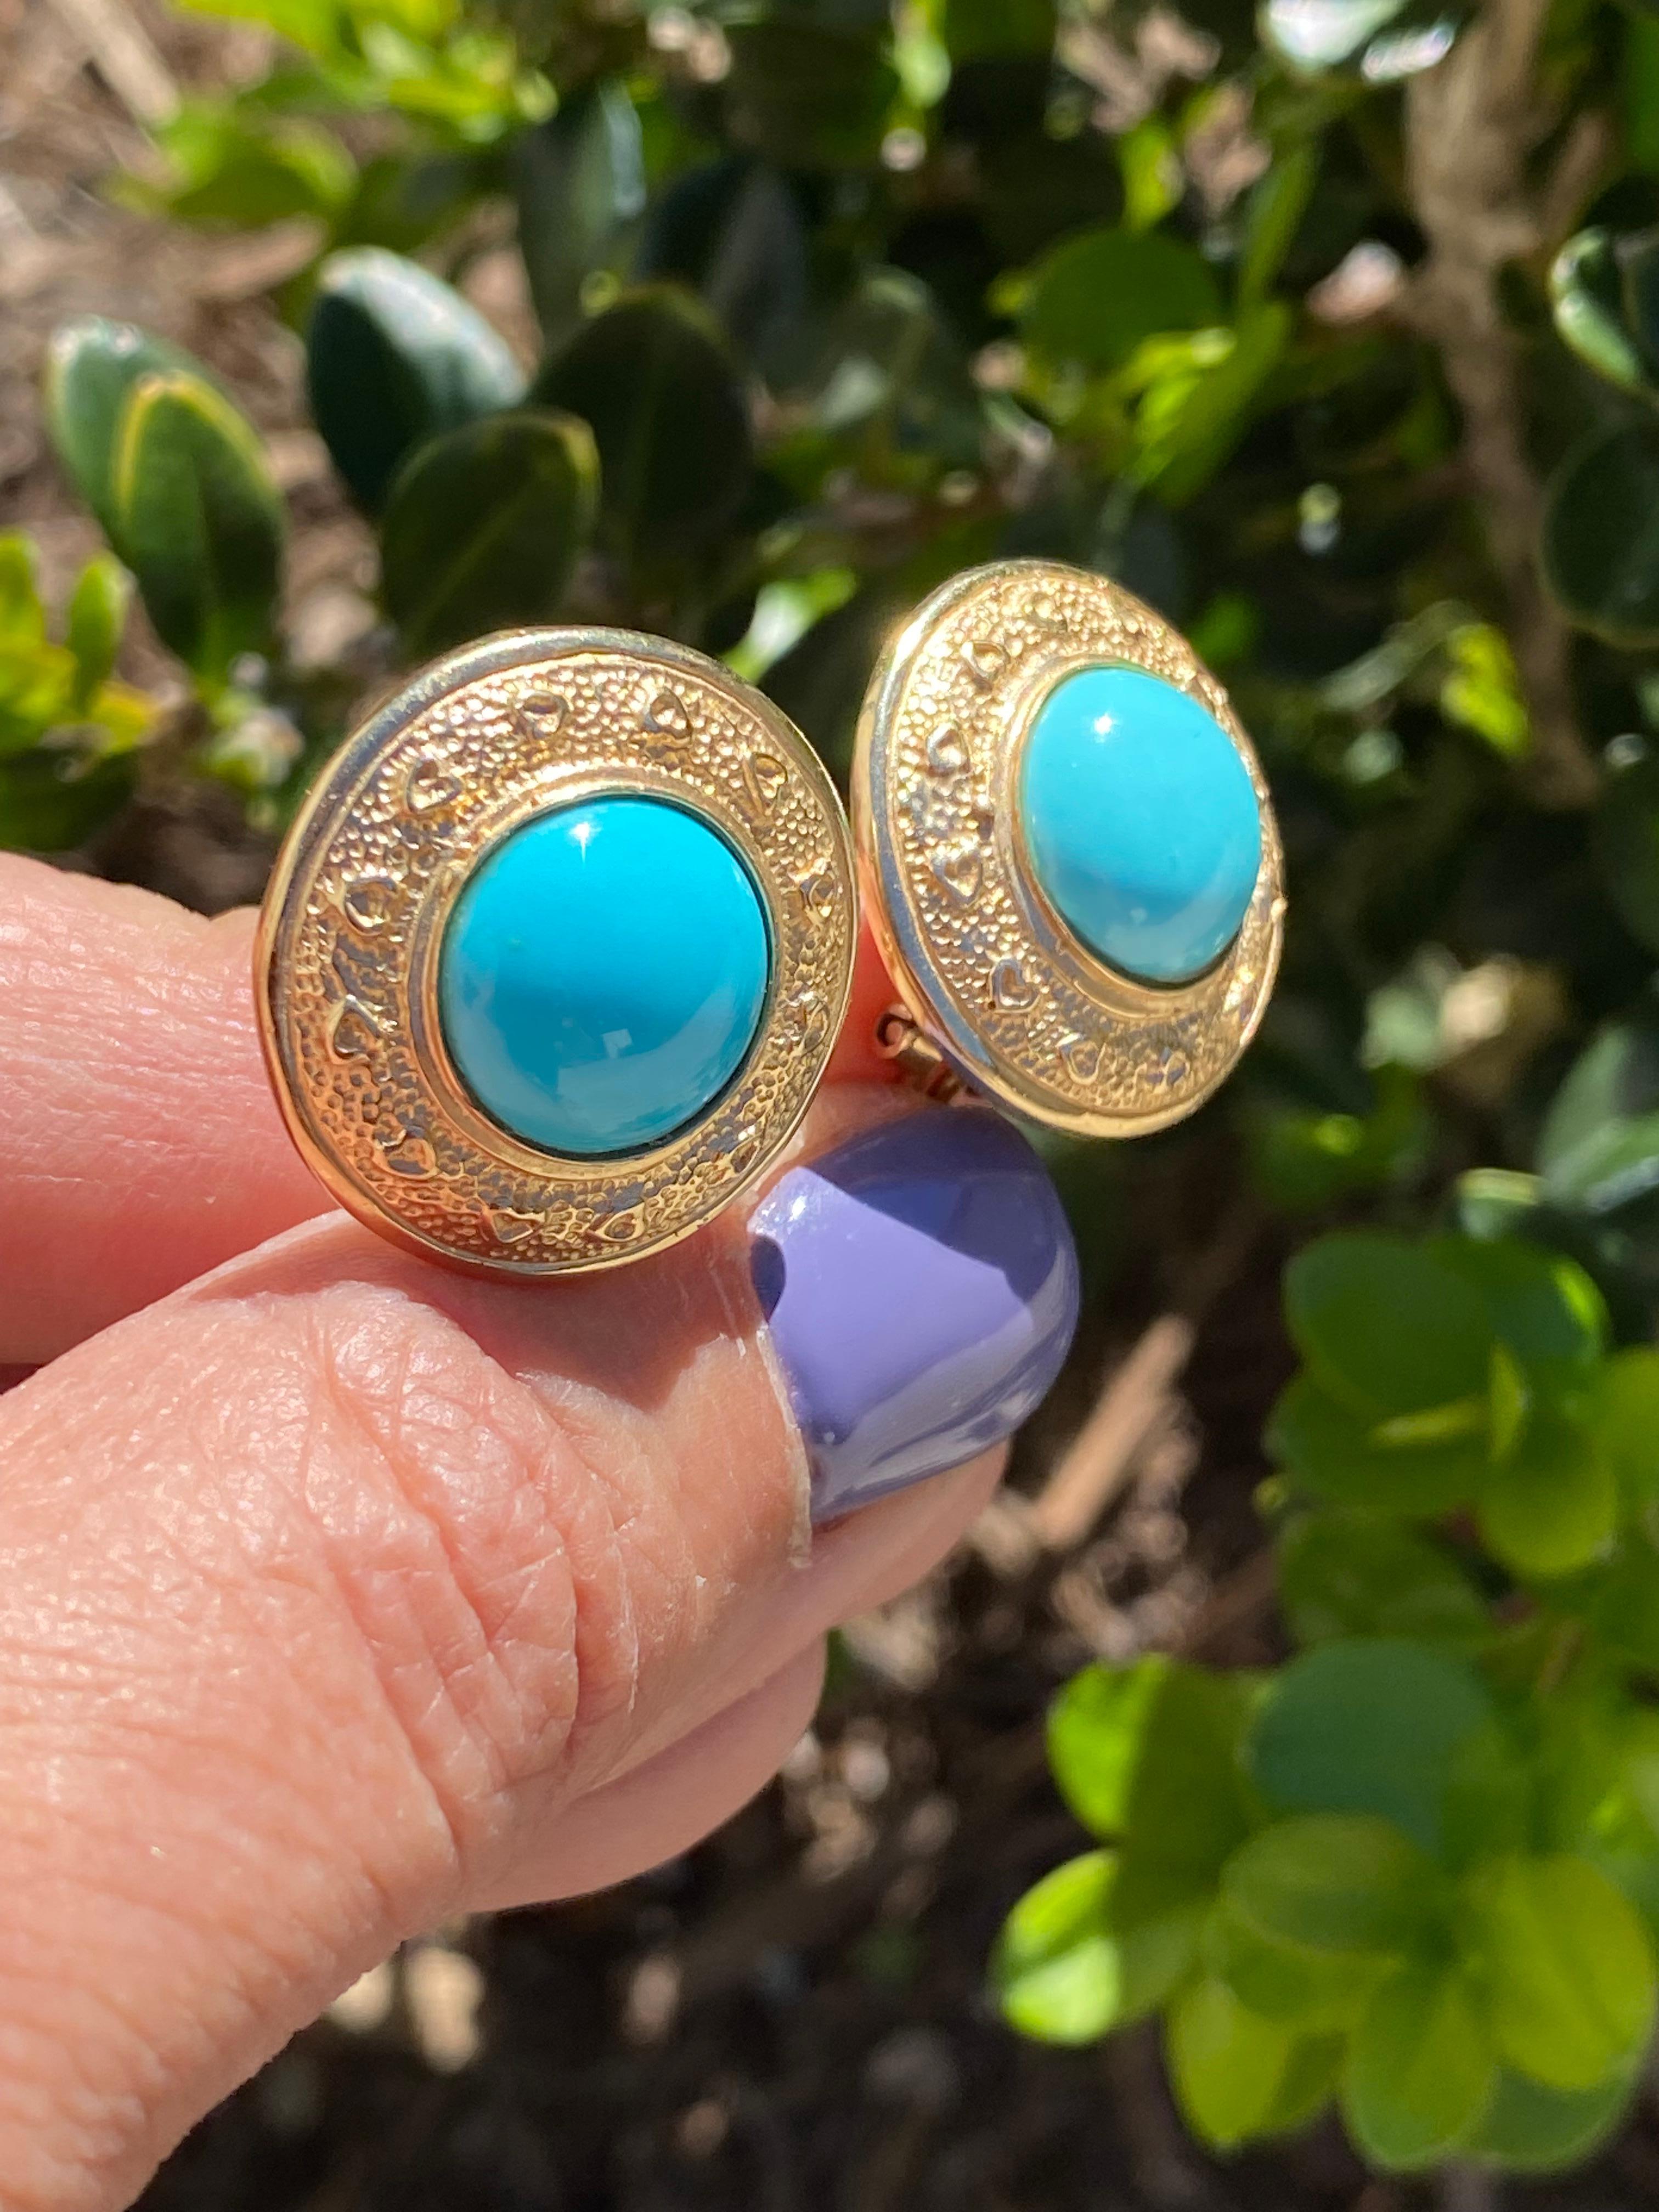 14 Karat Persian Turquoise Cabochon Earrings, 22 mm 
The bezel of the earrings is designed with small hearts on a textured border.
Turquoise is 12 mm and pure colored.
Earrings can be adjusted to a clip style by removing the post.
10.7 grams of 14